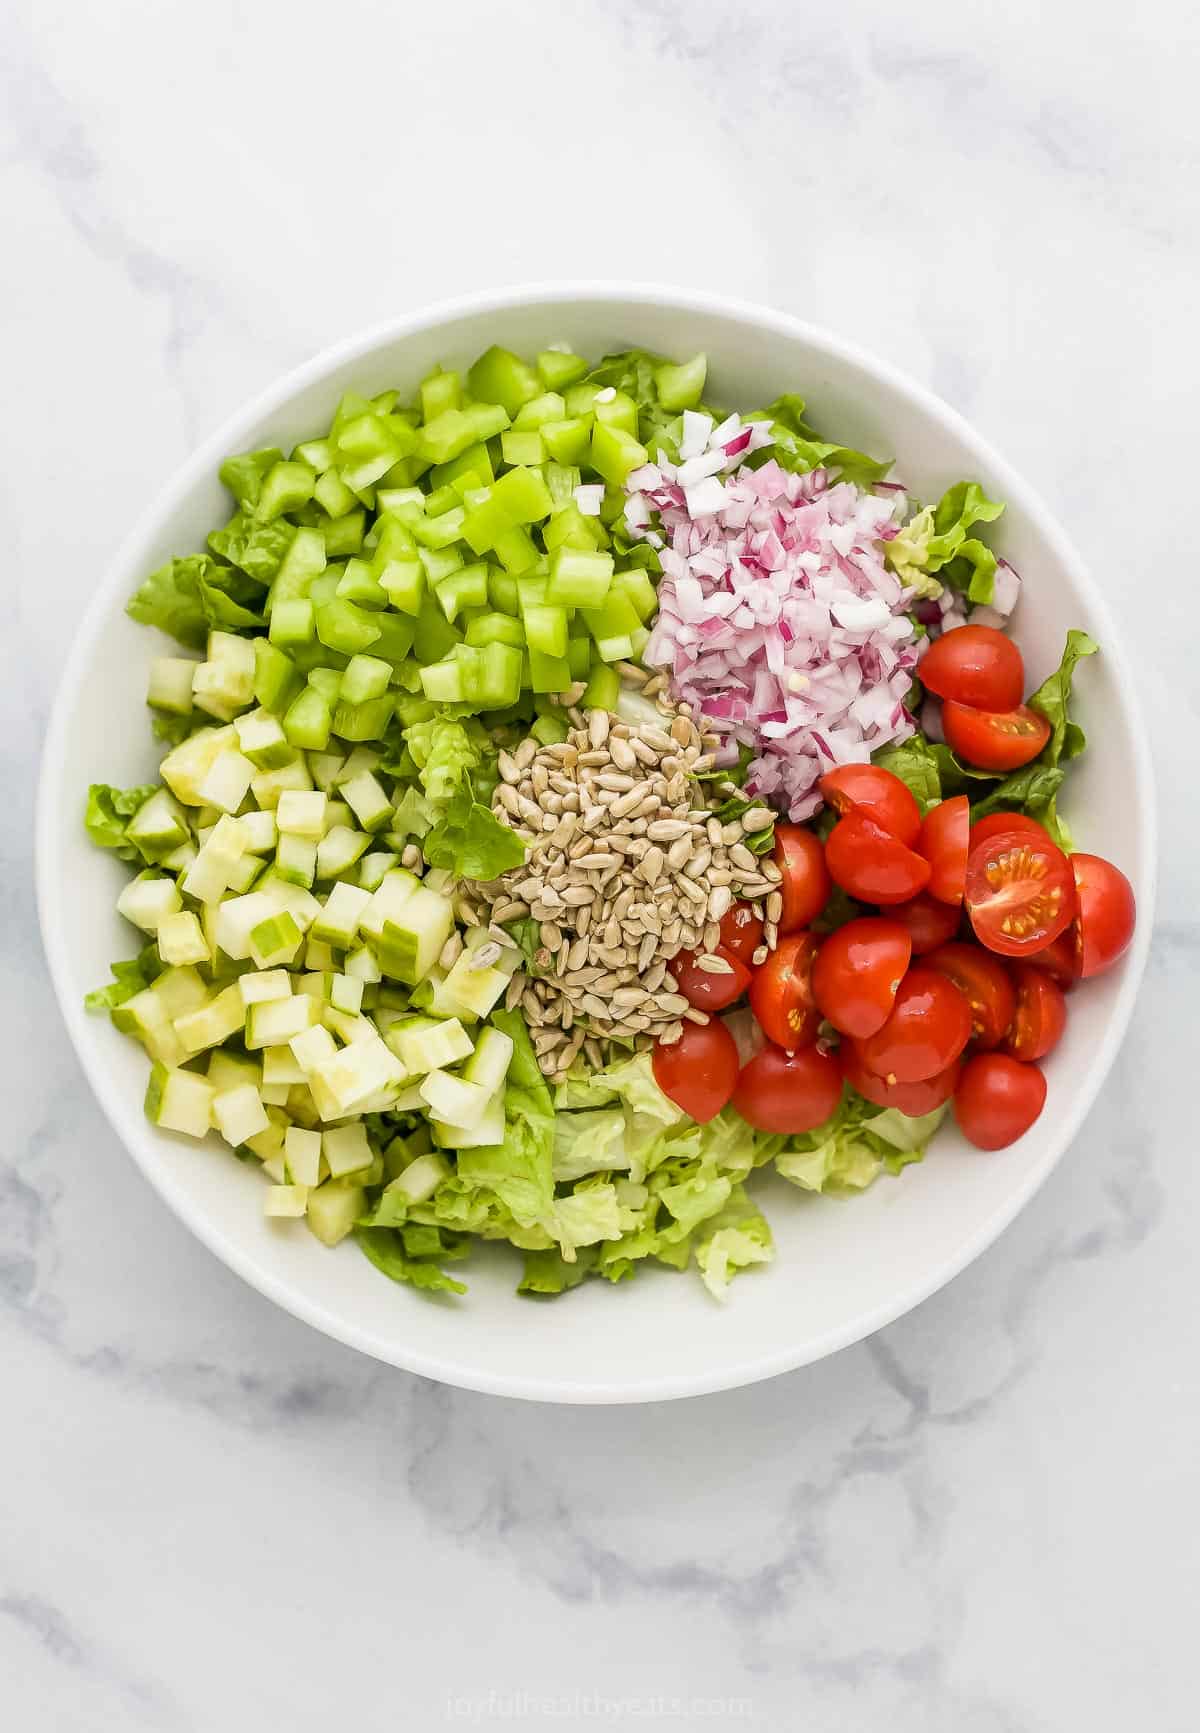 All of the prepared salad ingredients in a bowl on a marble kitchen countertop